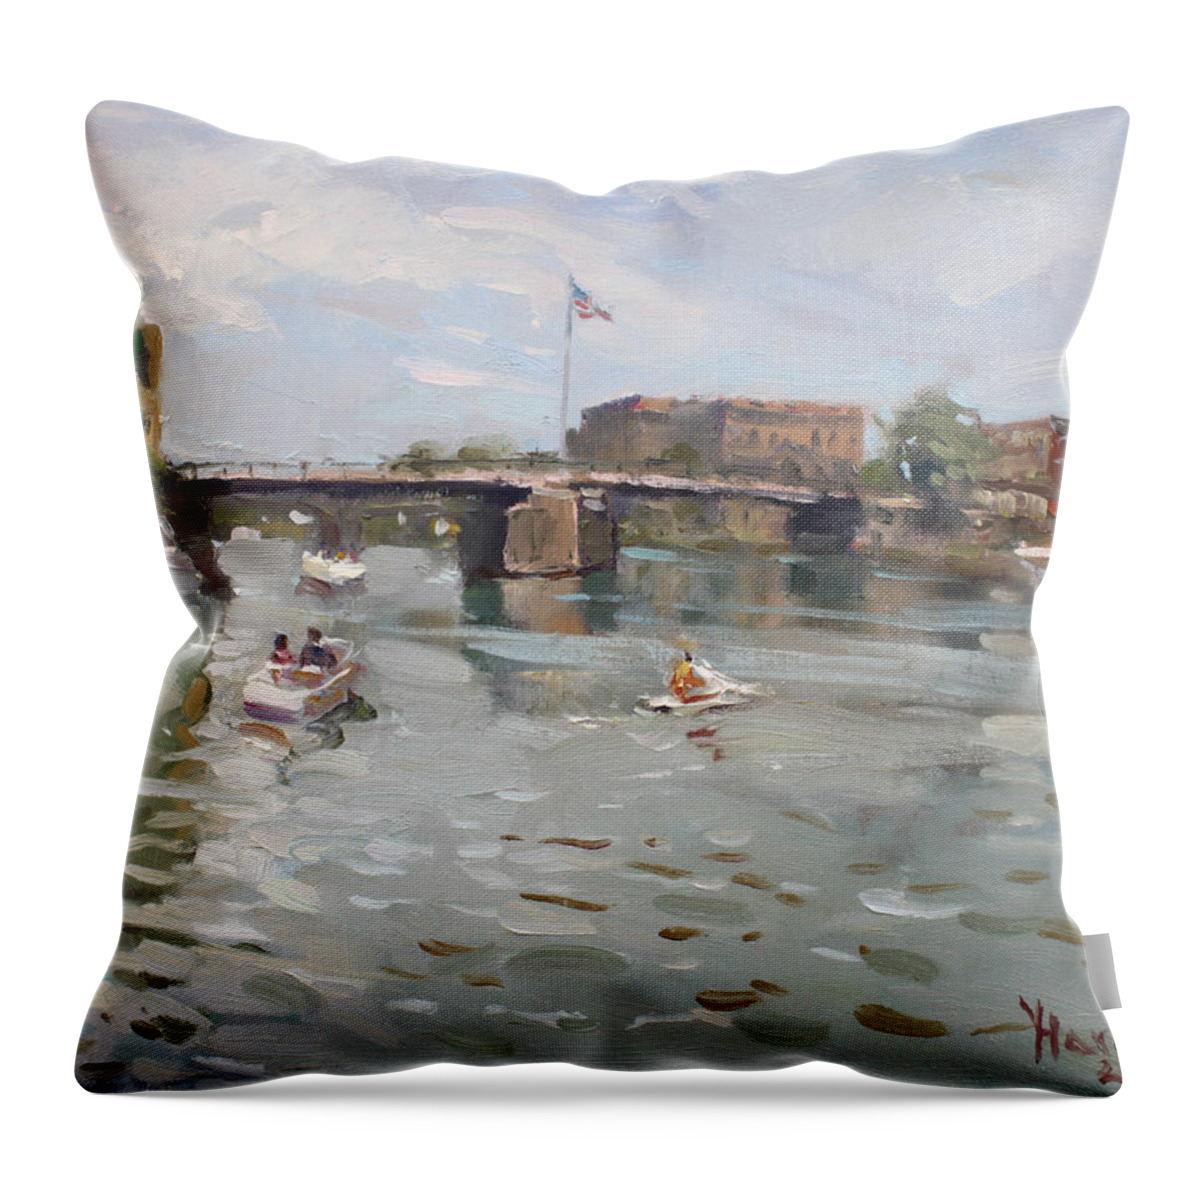 Canal Throw Pillow featuring the painting Canal at Tonawanda City by Ylli Haruni